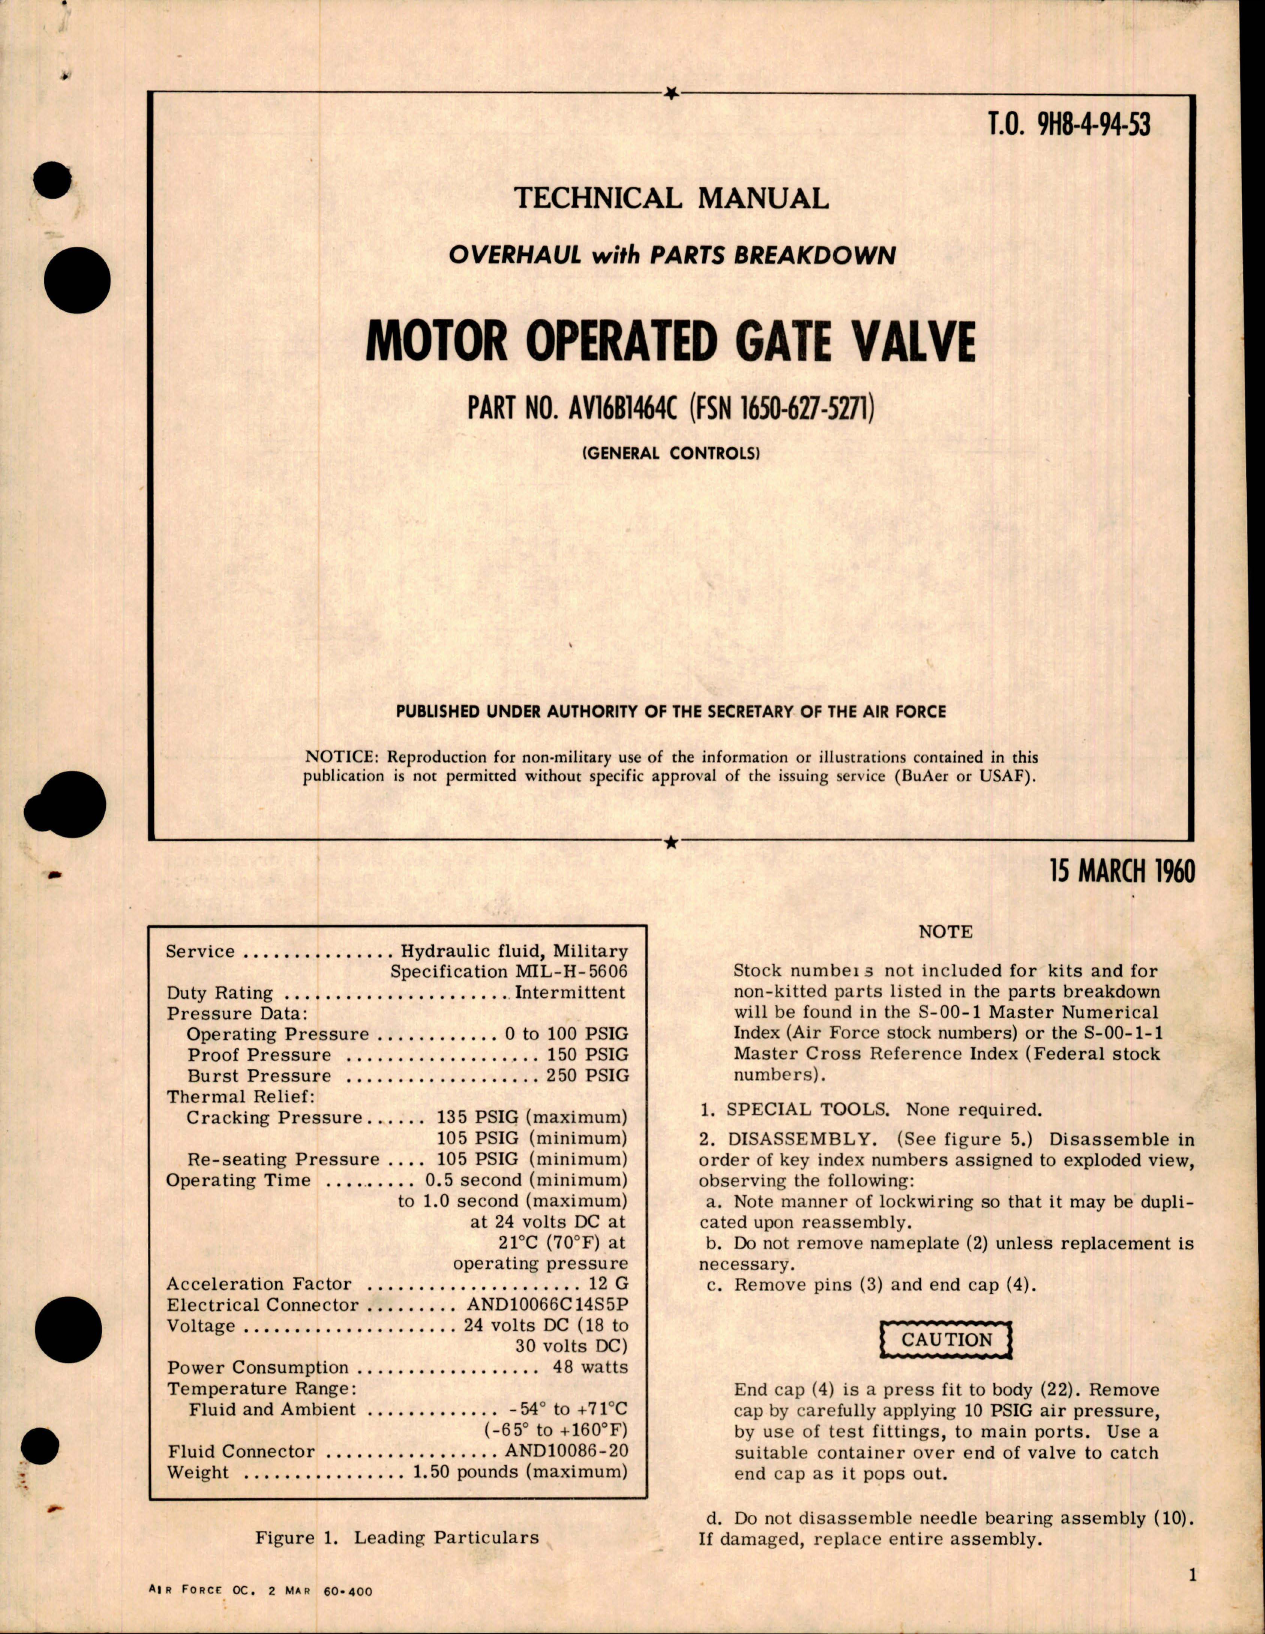 Sample page 1 from AirCorps Library document: Overhaul with Parts Breakdown for Motor Operated Gate Valve - Part AV16B1464C 